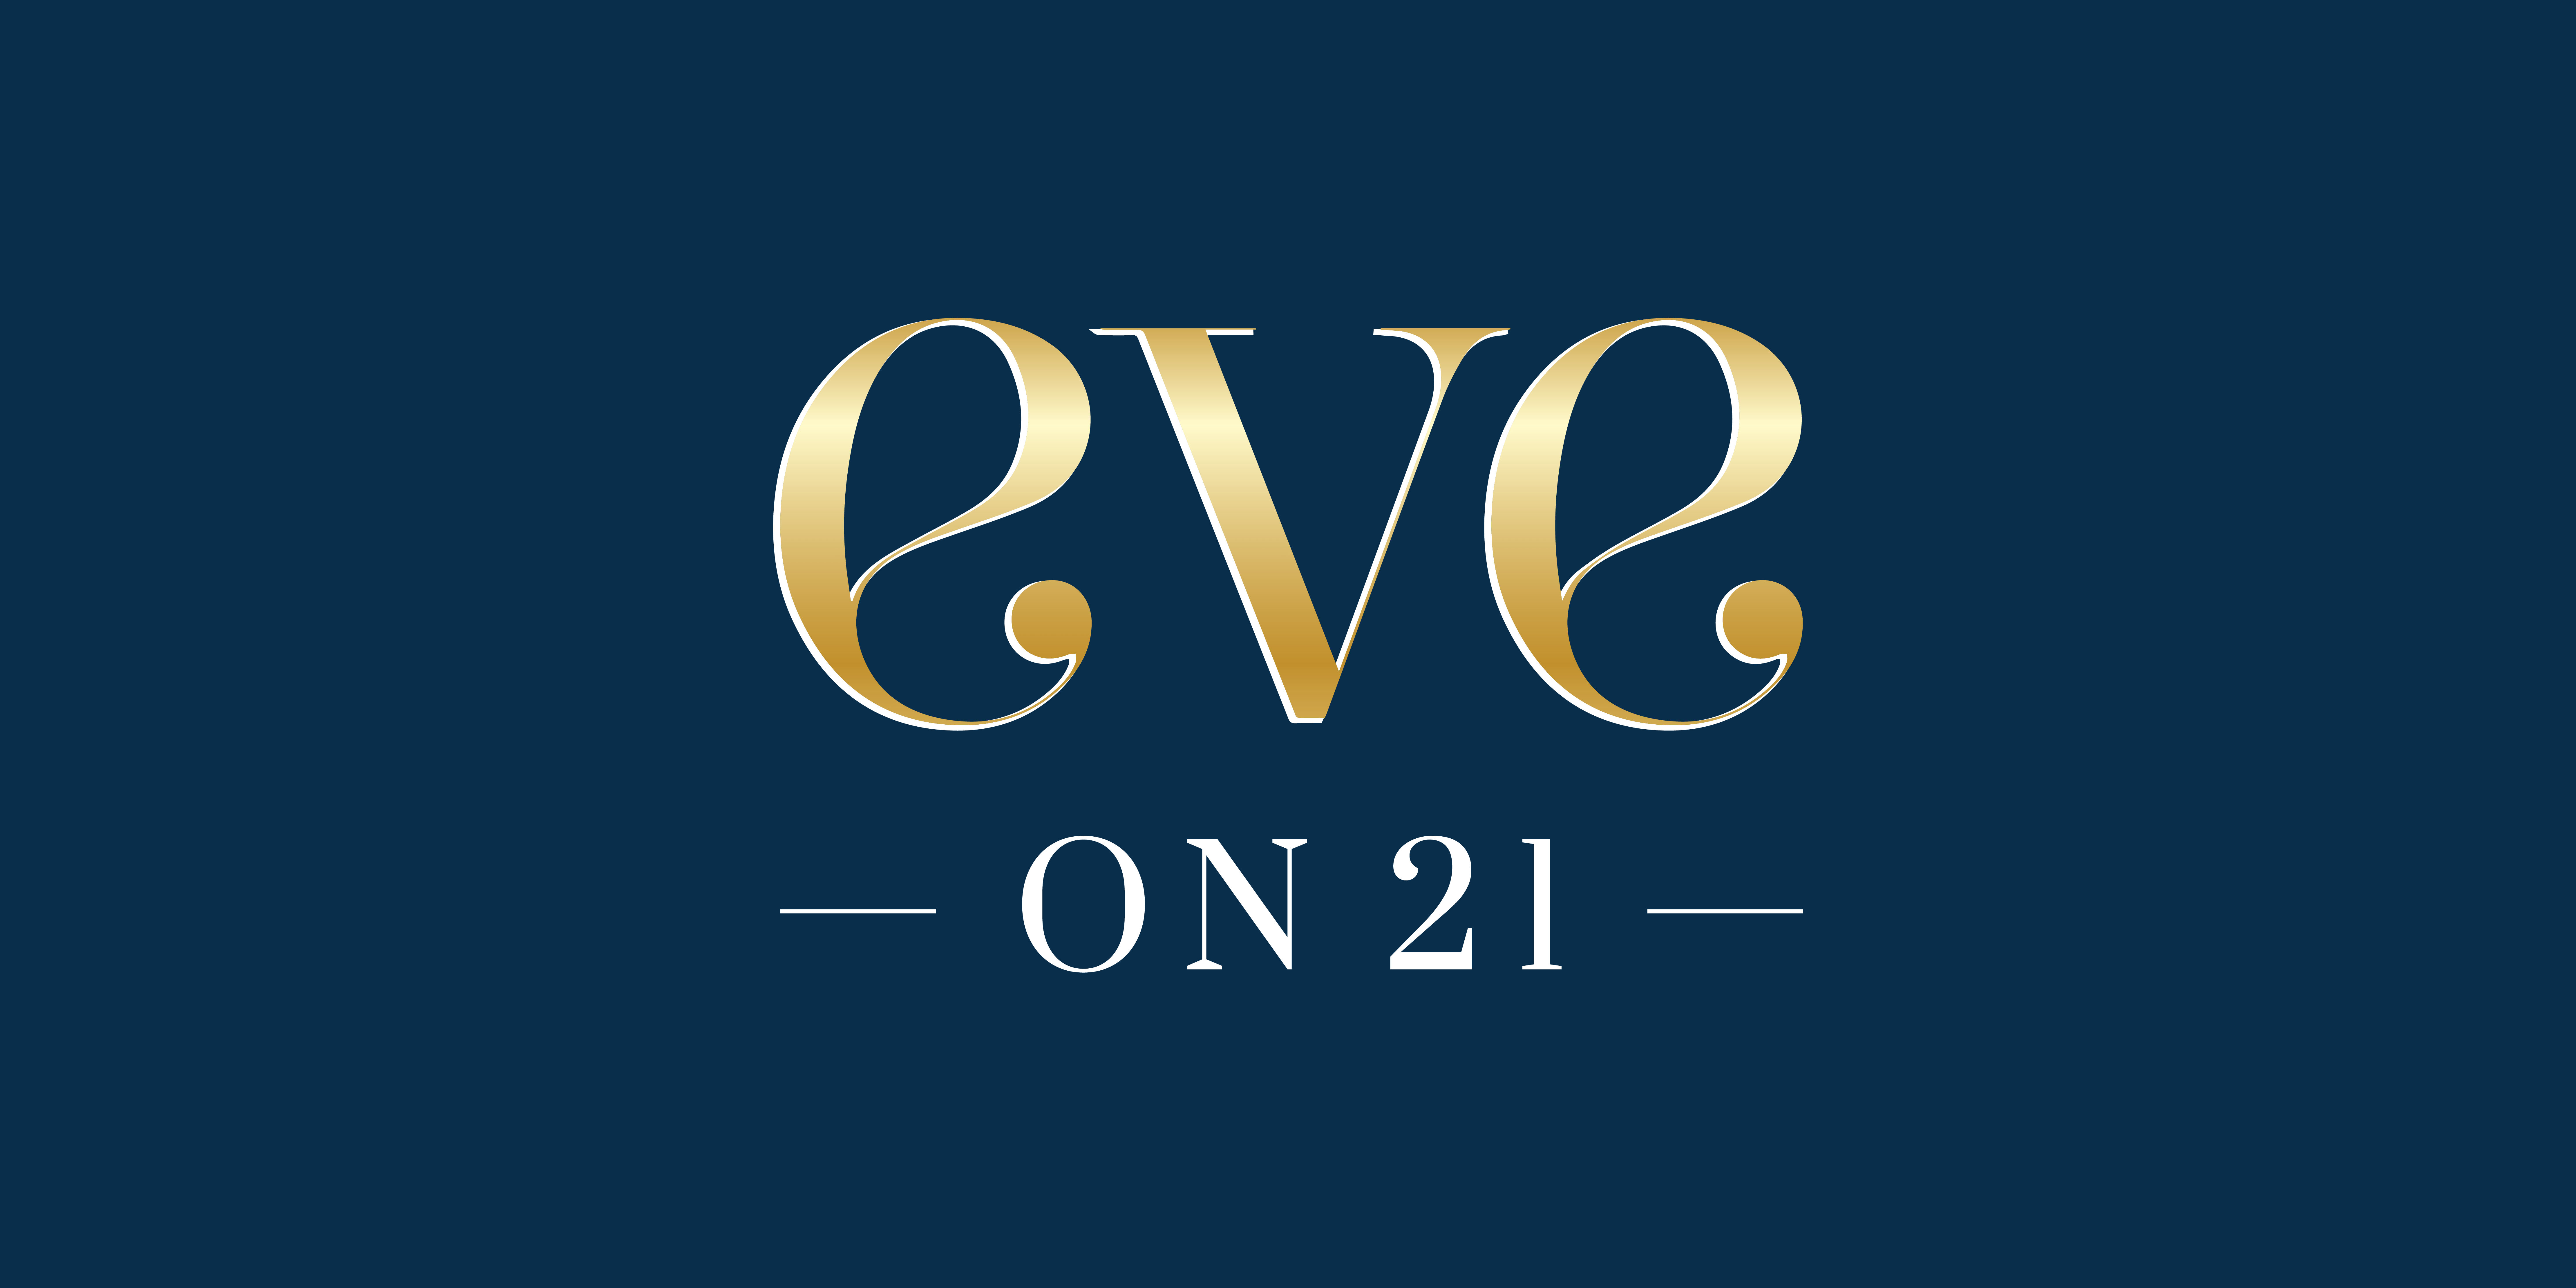 Eve On 21 - Health And Beauty Wellness Clinic in Adelaide